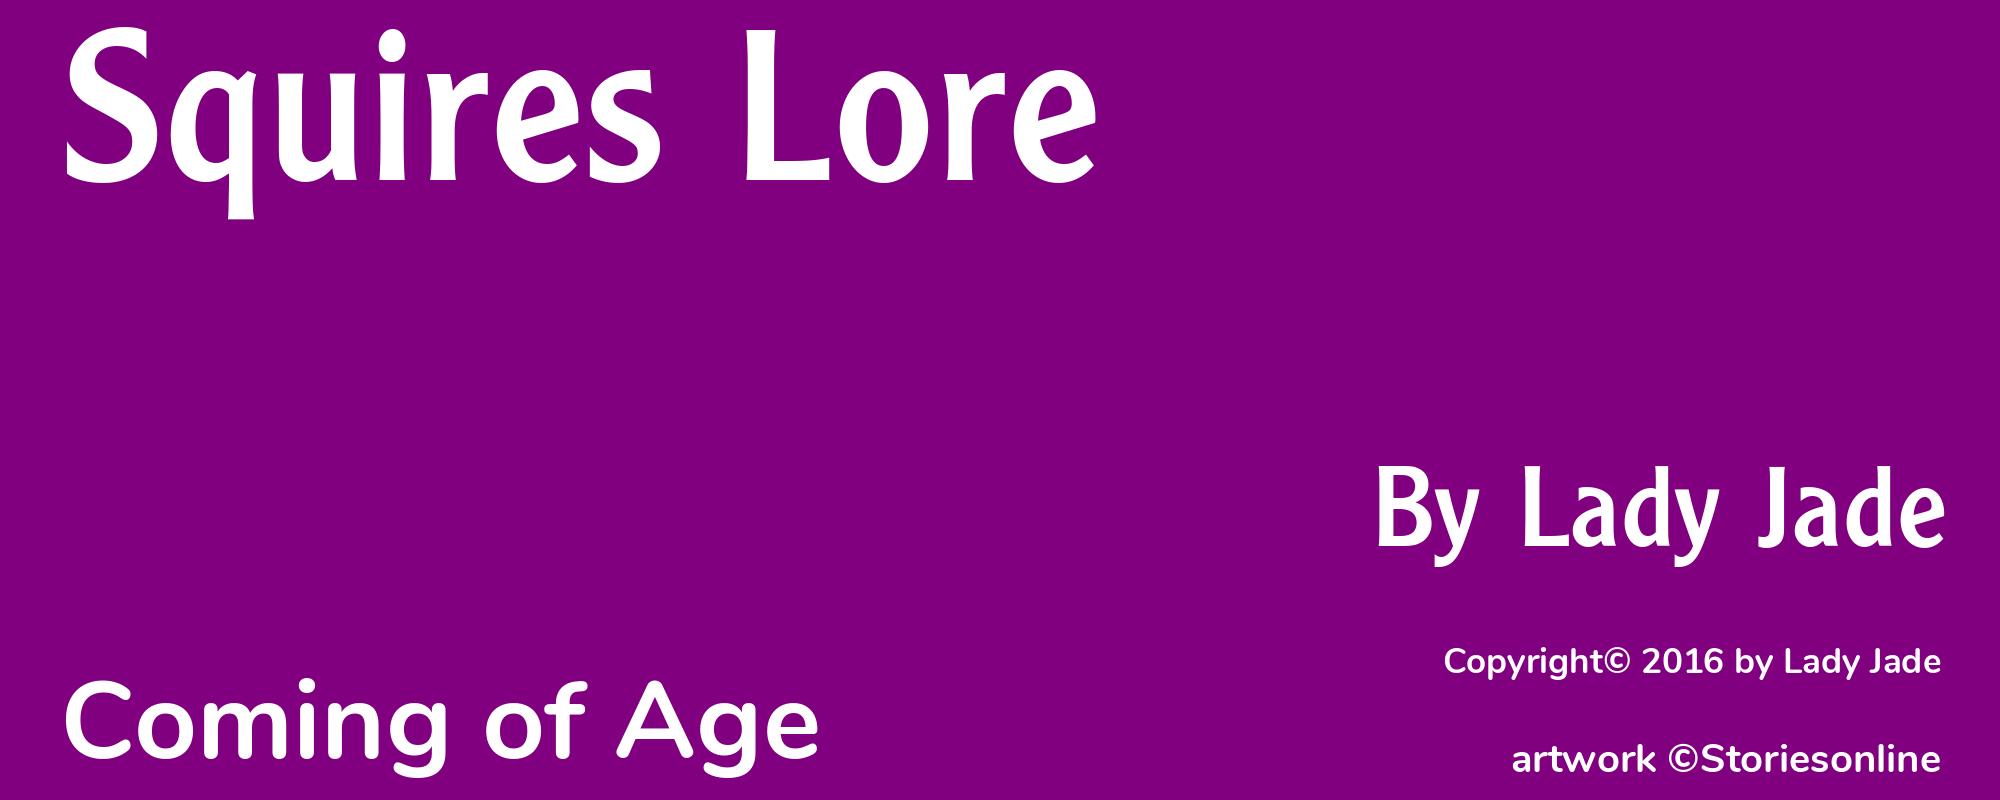 Squires Lore - Cover